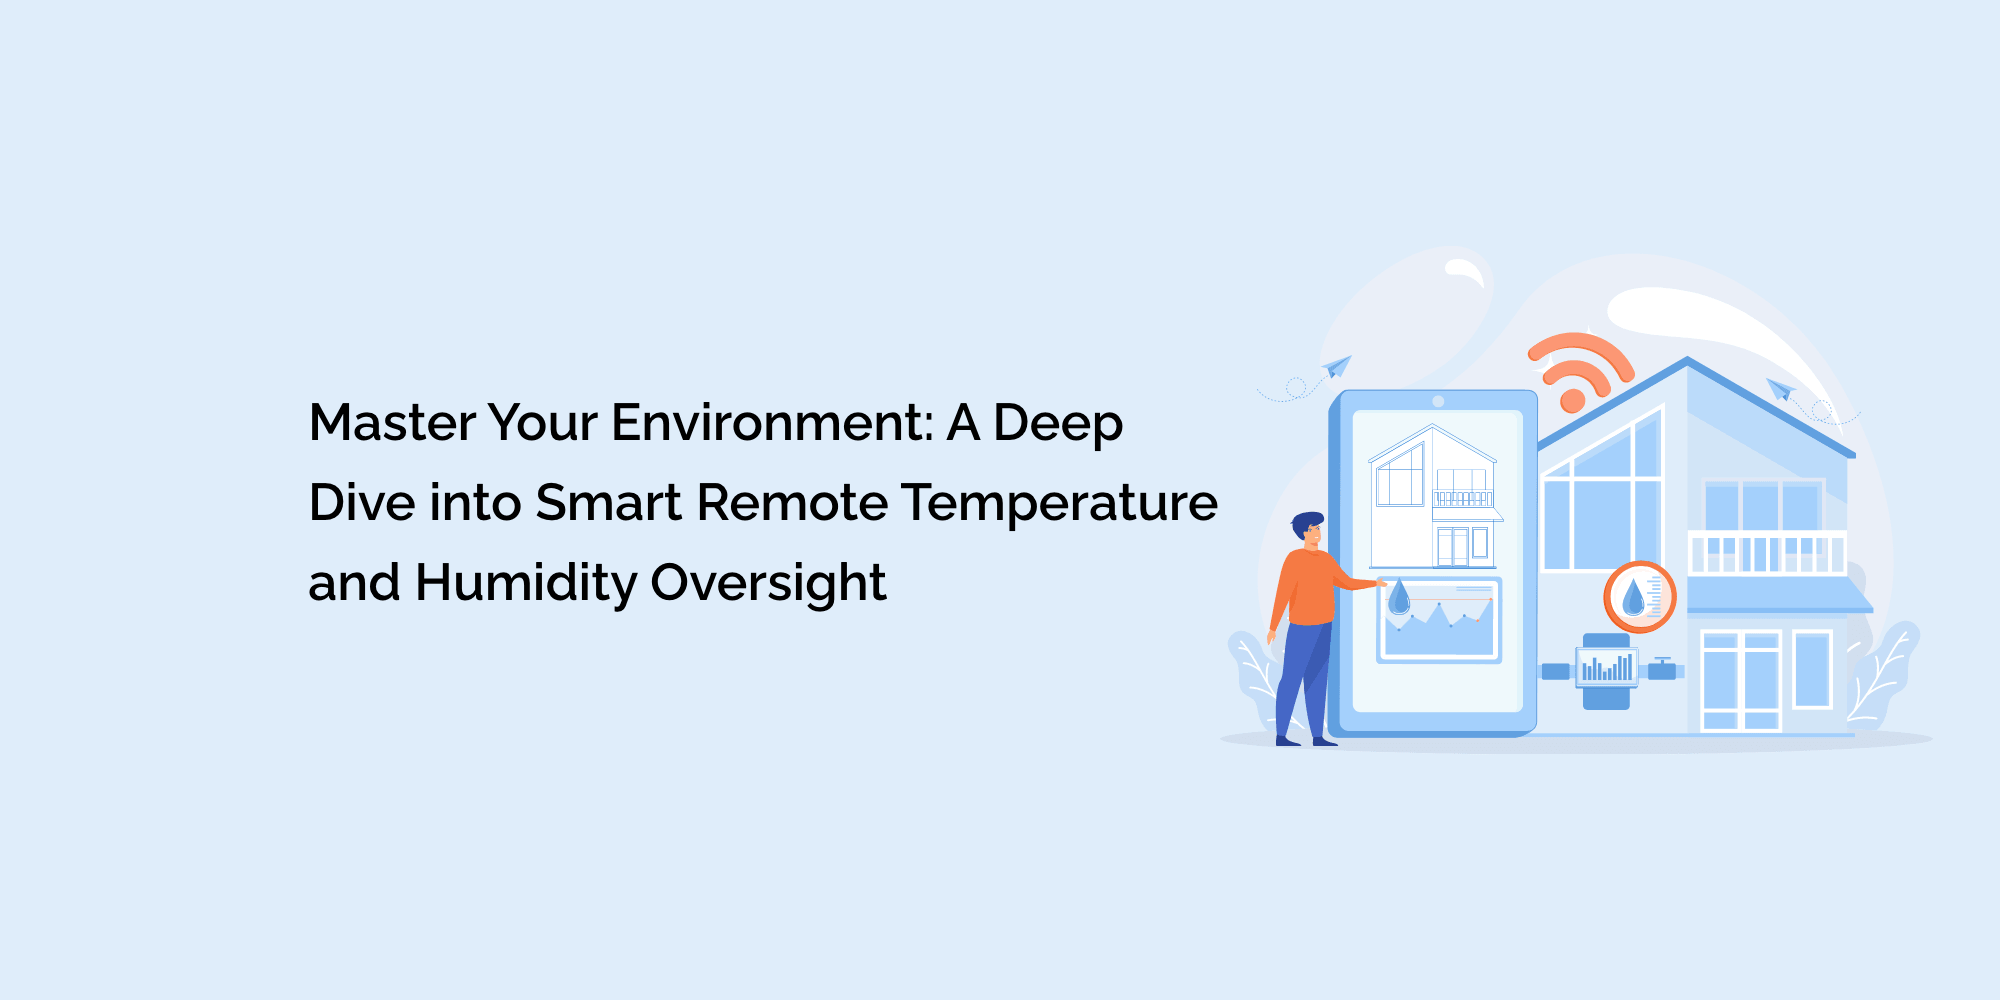 Master Your Environment: A Deep Dive into Smart Remote Temperature and Humidity Oversight